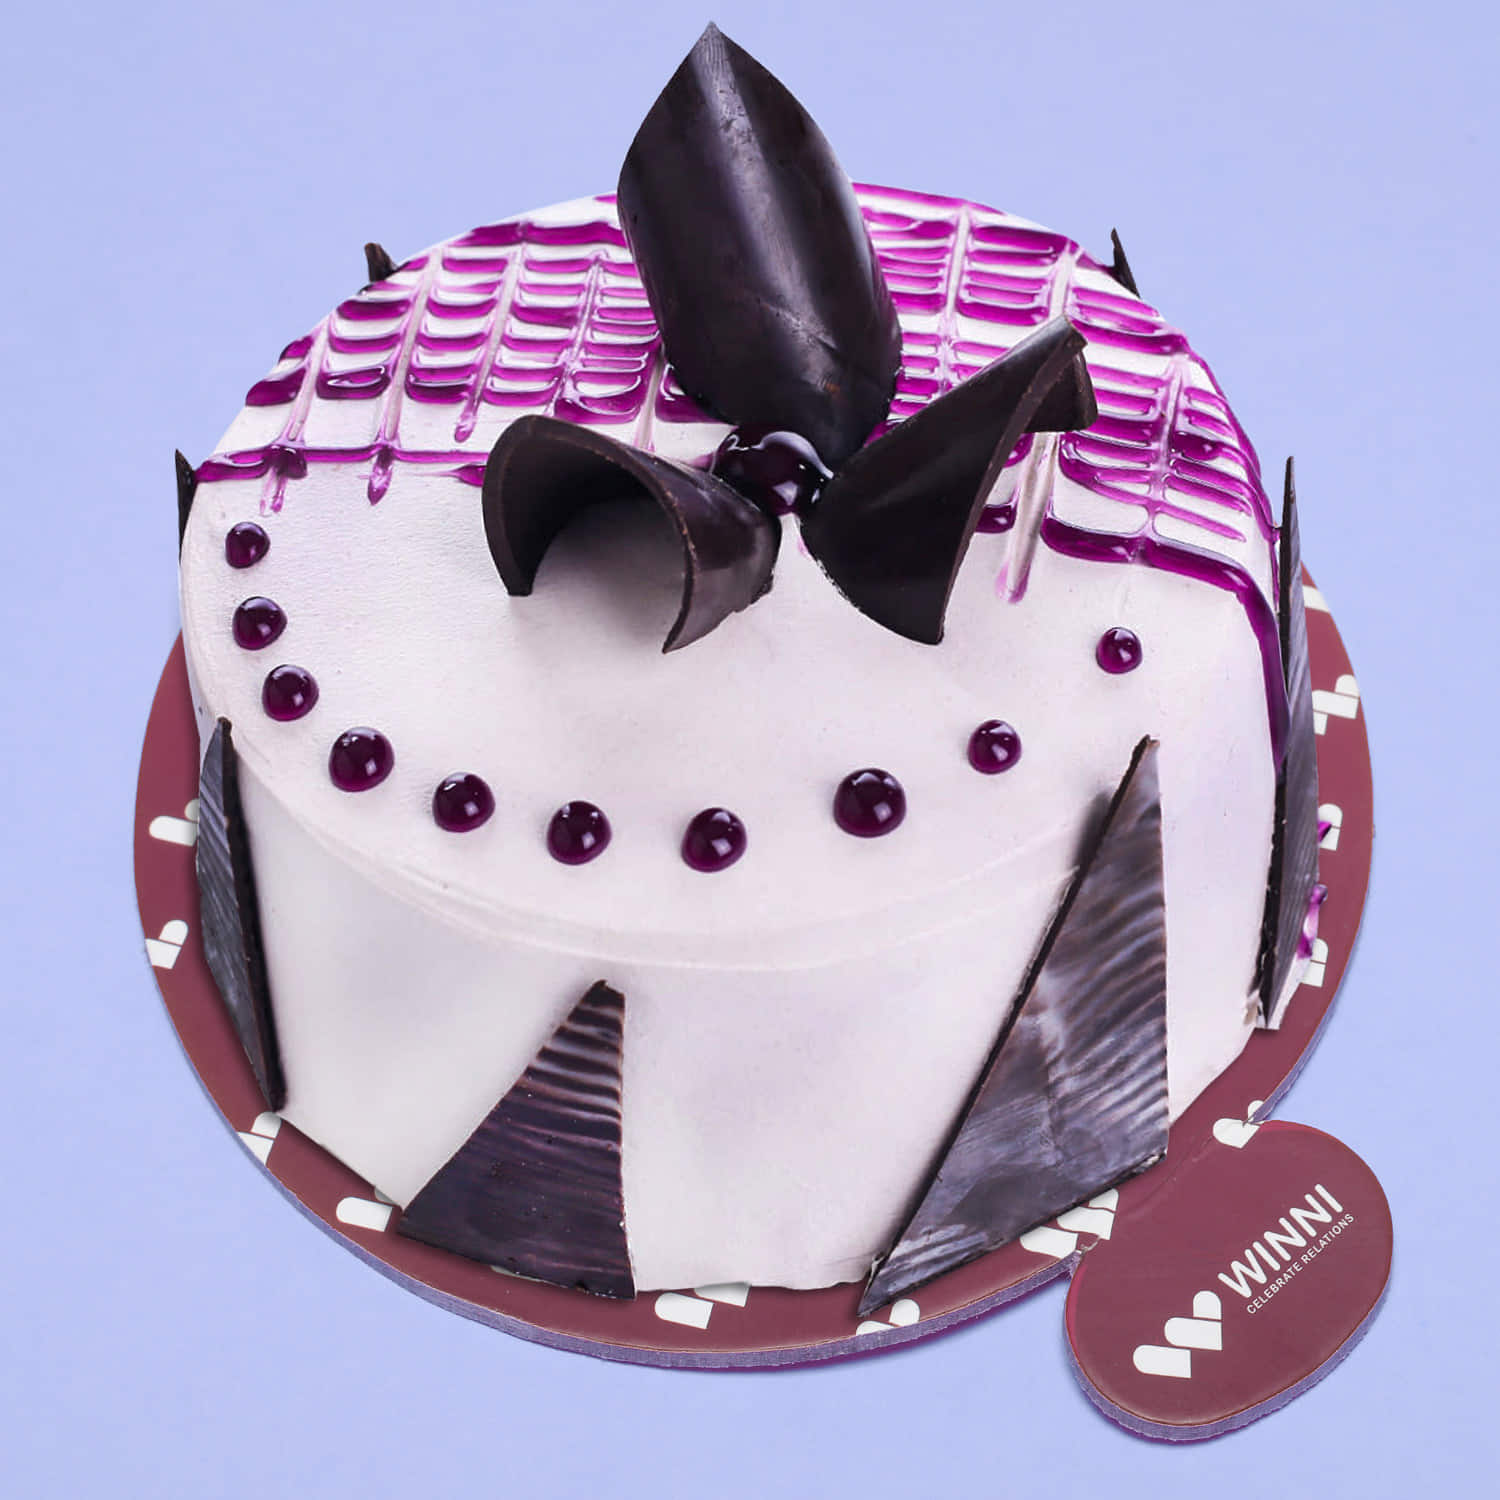 Online Pretty Sky Blueberry Cake 8 Portion Gift Delivery in UAE - FNP